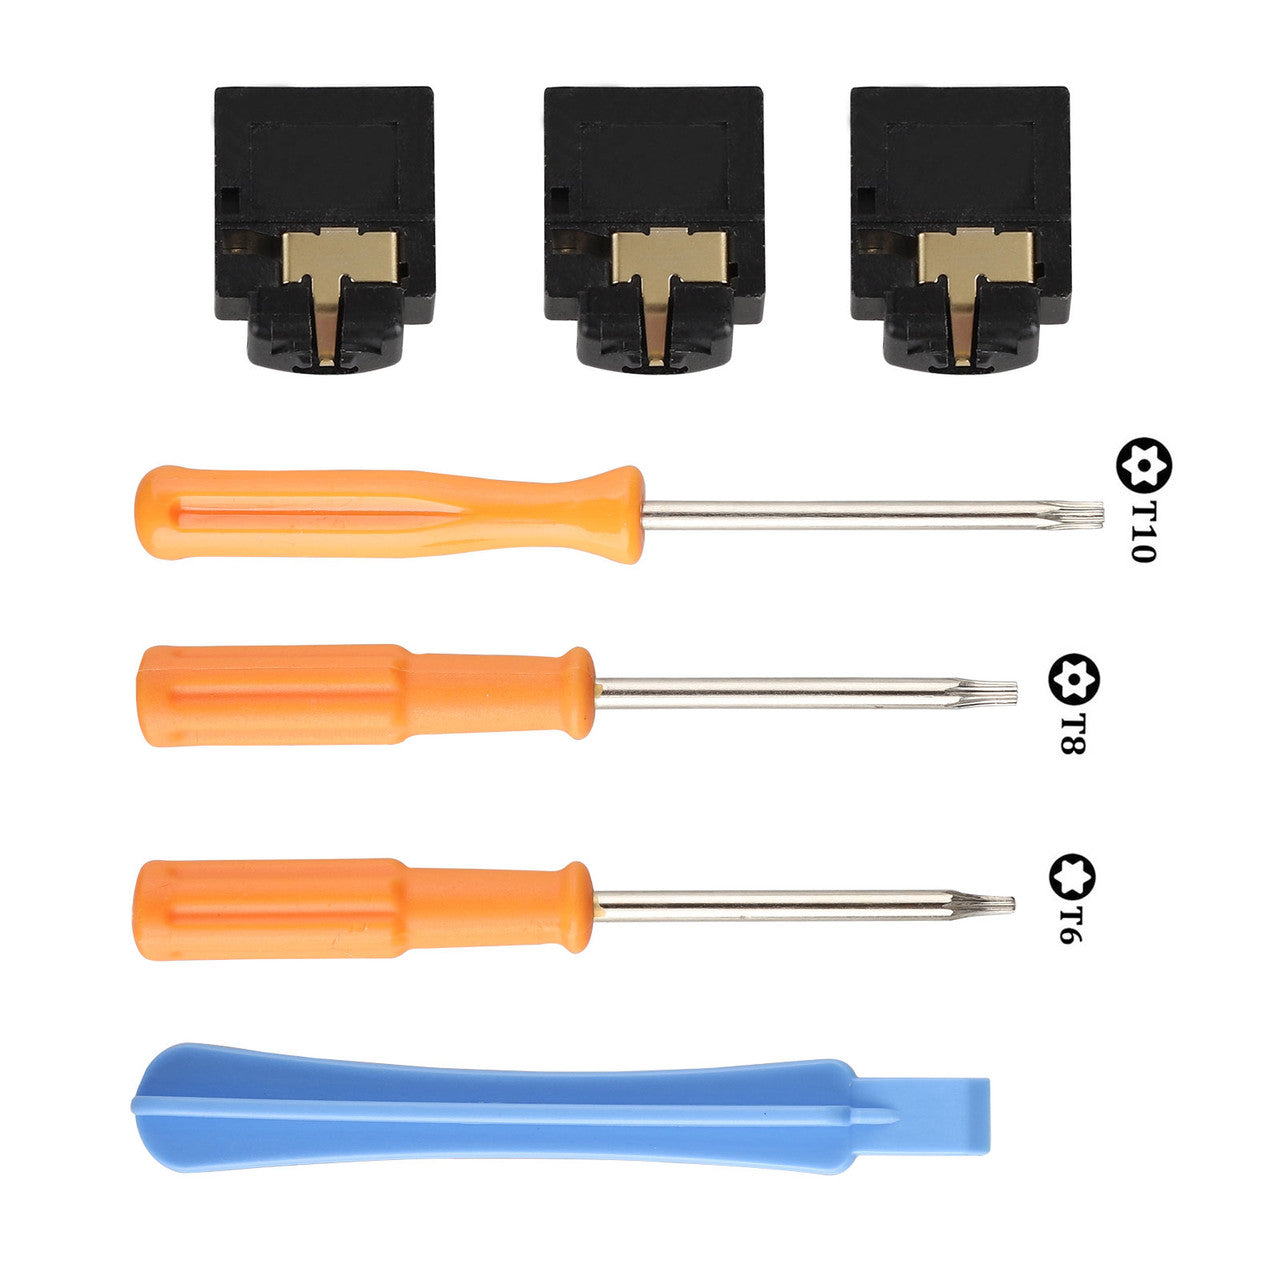 3.5mm Headphone Headset Jack Replacement + T6 T8 T10 Screwdrivers Repair Tool Compatible with Xbox One Controller, Xbox 360, Playstation 3 PS3 PS4, 3Pcs